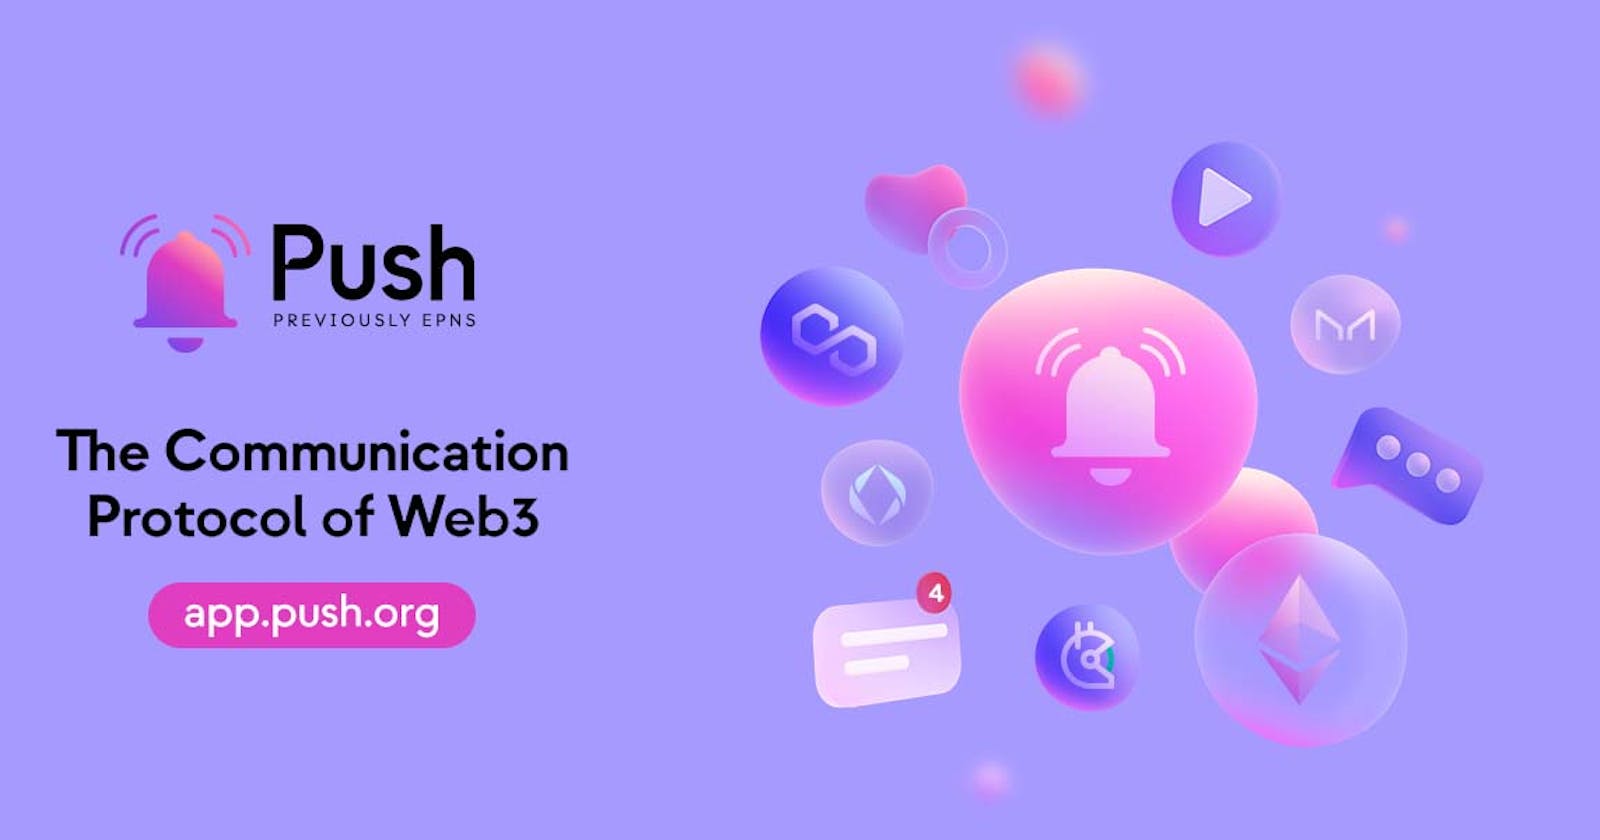 All about Push Protocol : The Communication Protocol of Web3